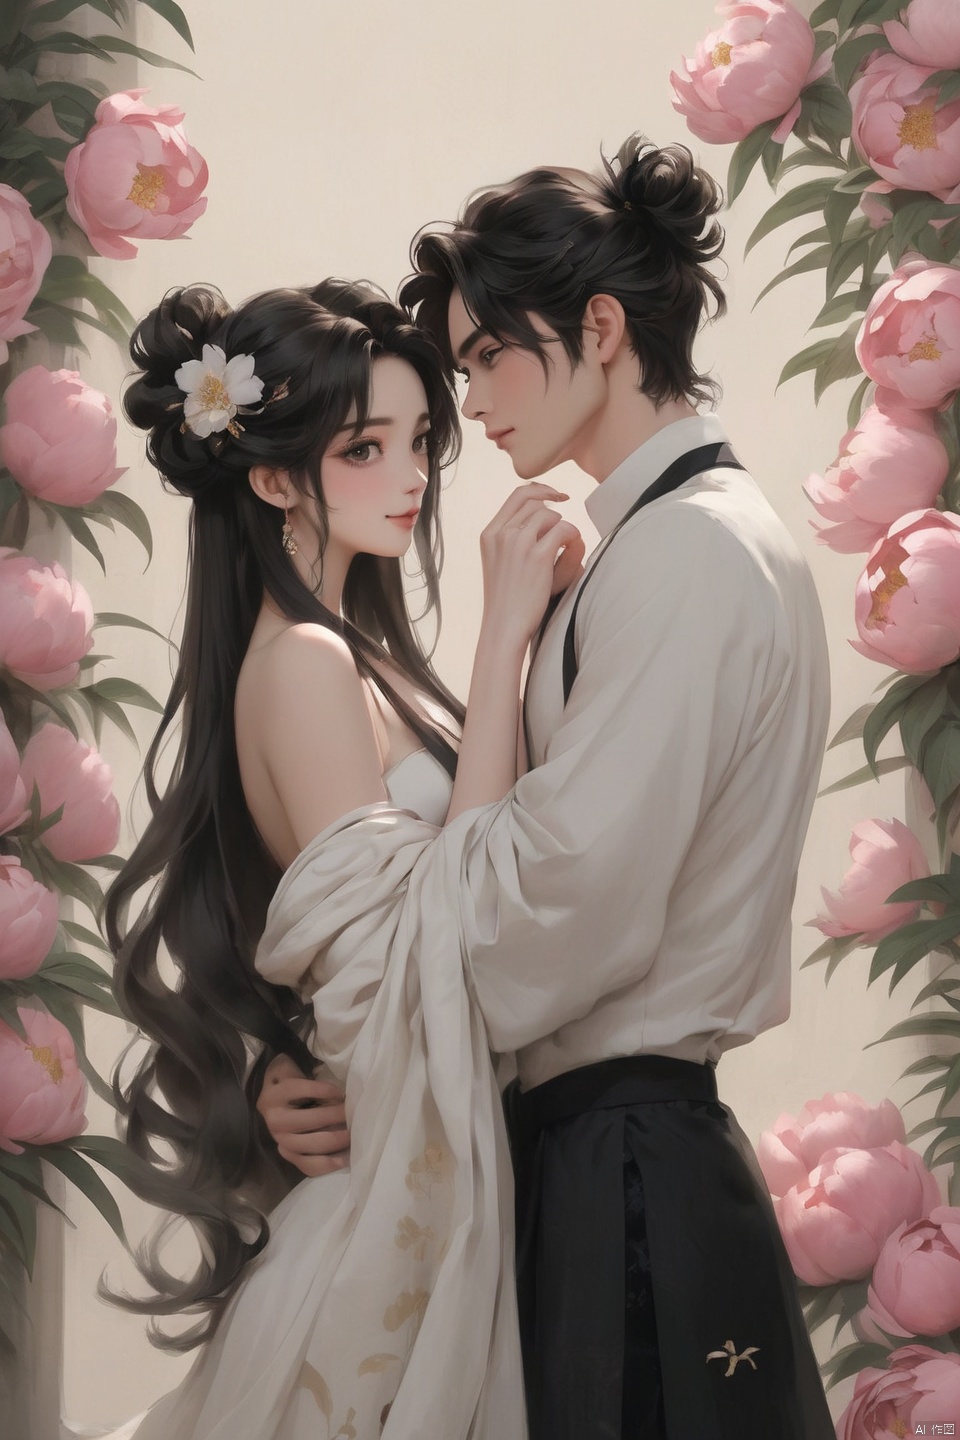  Background Peony, 1 girl, 1 boy, touching together, stud ears, long hair, solo, looking at the audience, Peony tattoo, chest, belly band, black eyes, actor, flower makeup, off-the-shoulder, shut up, paper, black hair, crop, topless, collarbone, sexy, crested, flower, sleeve, tattoo on back,